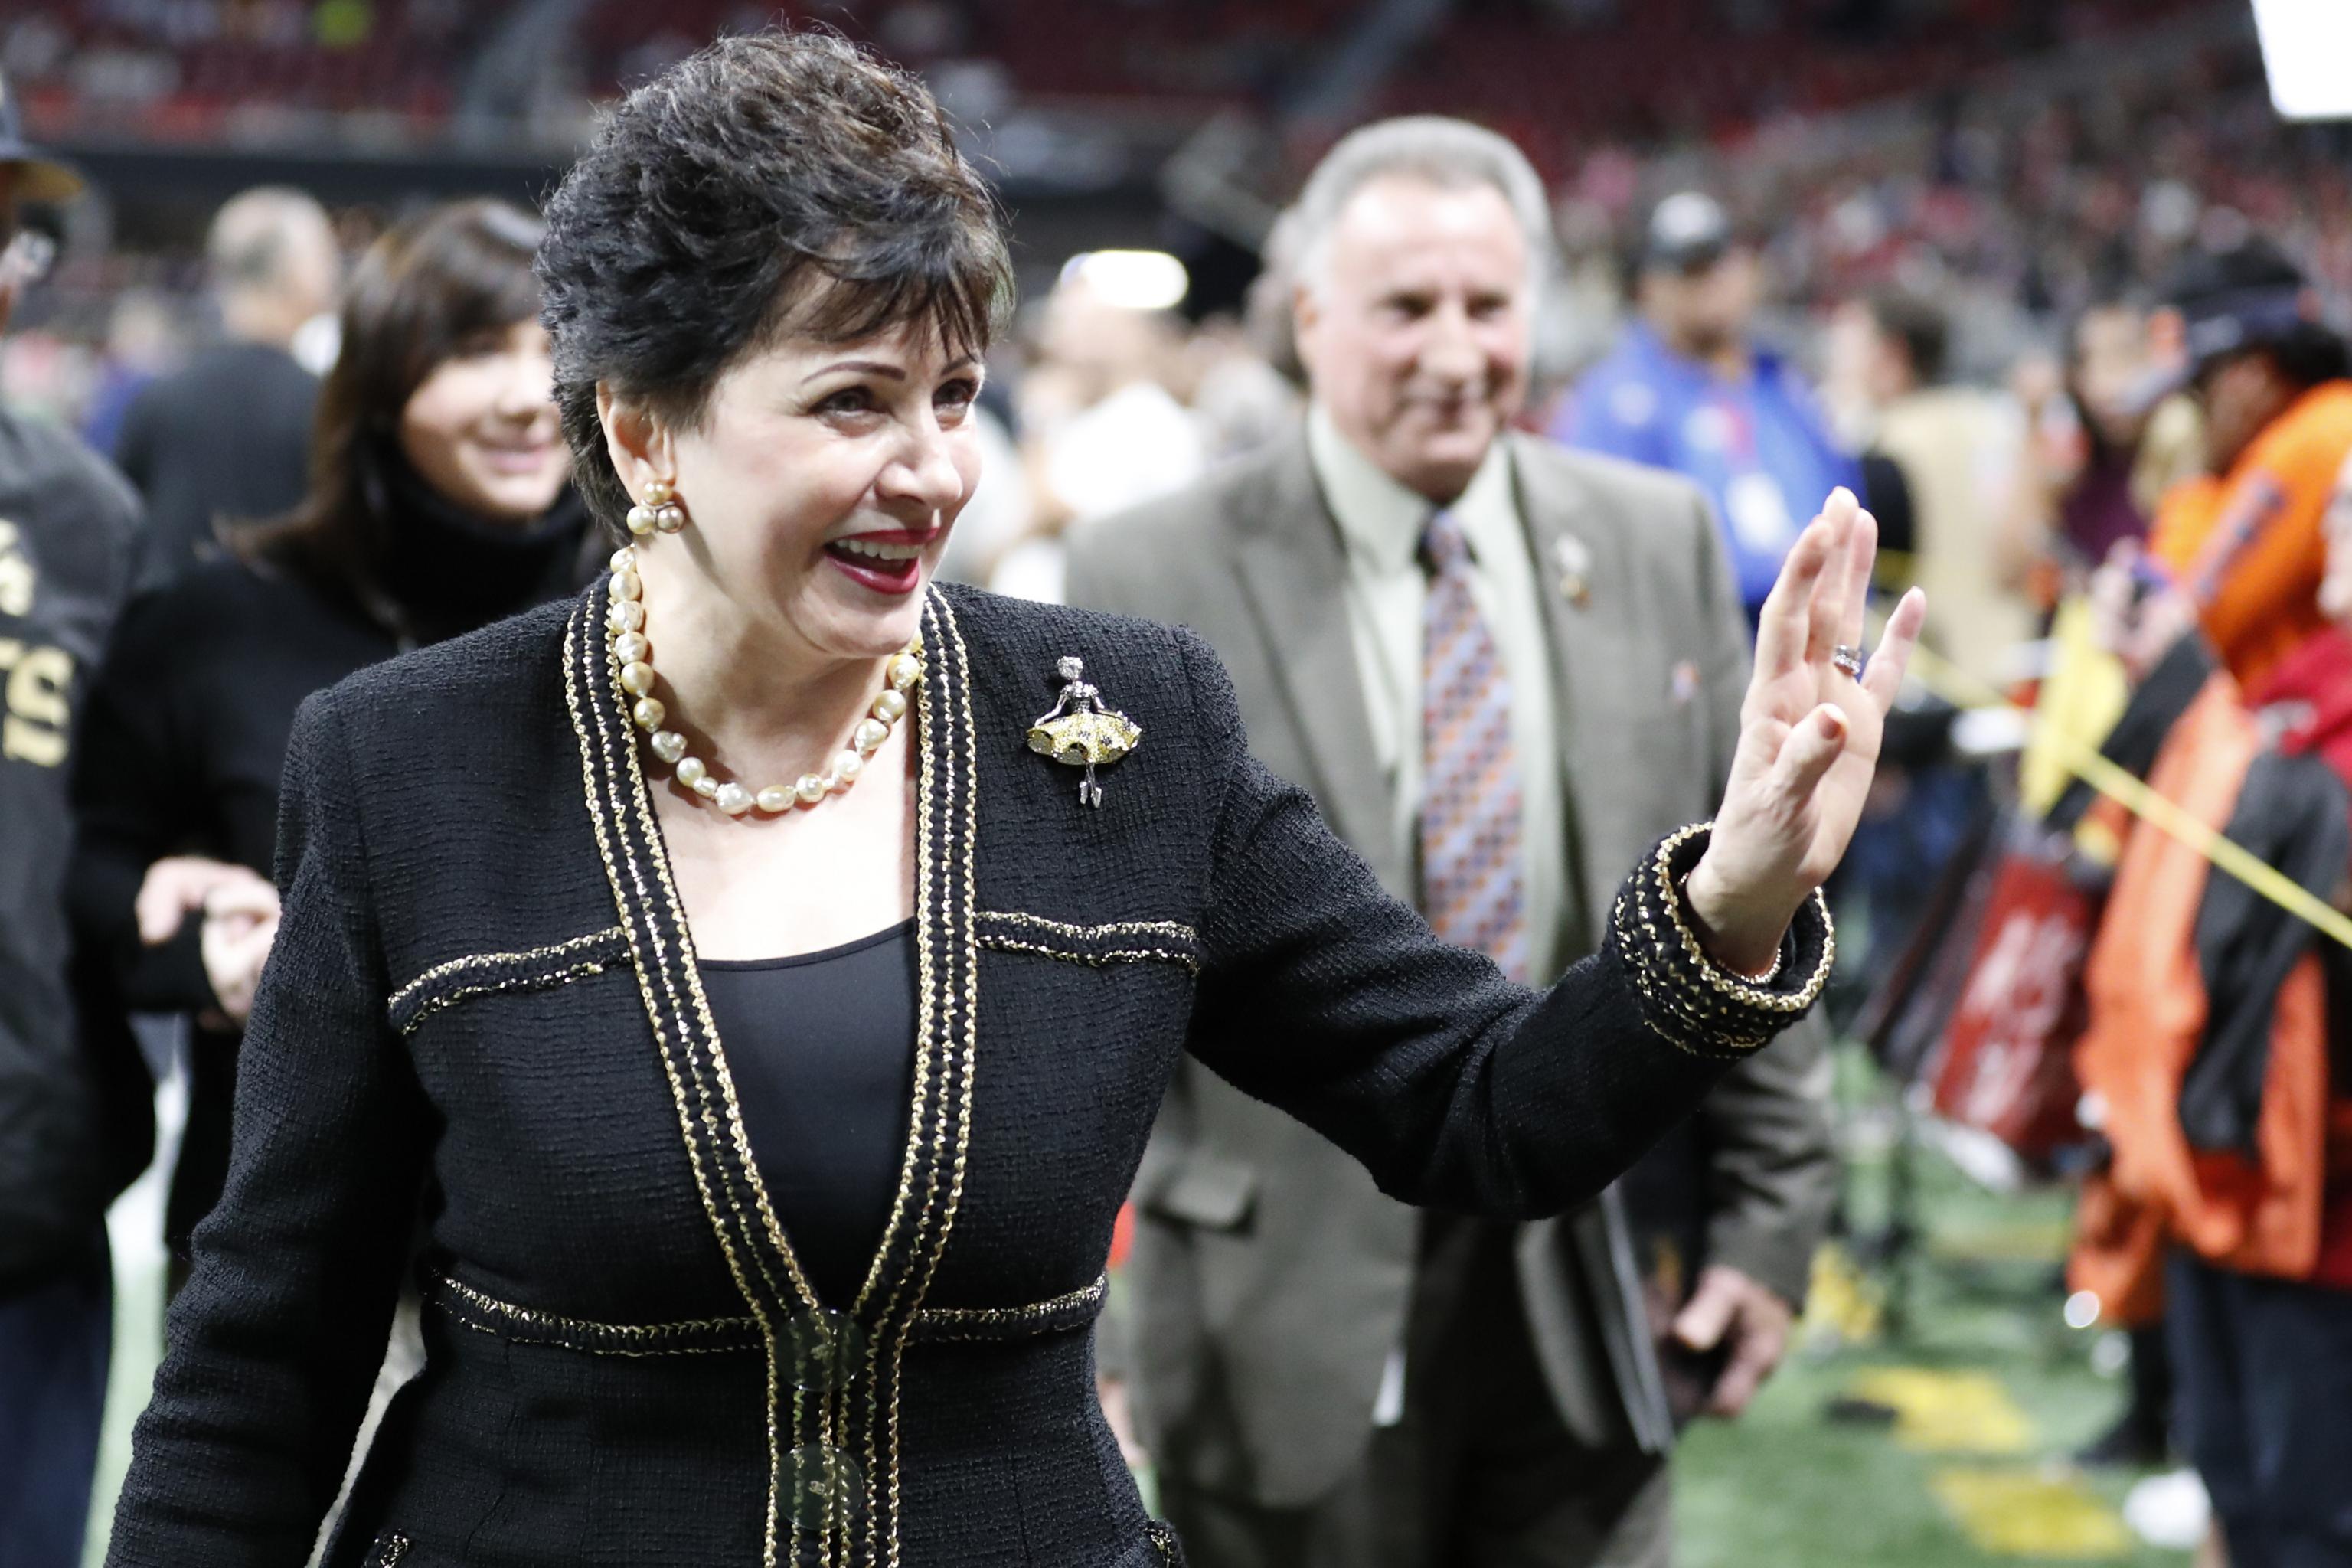 Saints and Pelicans owner Gayle Benson tests positive for COVID-19